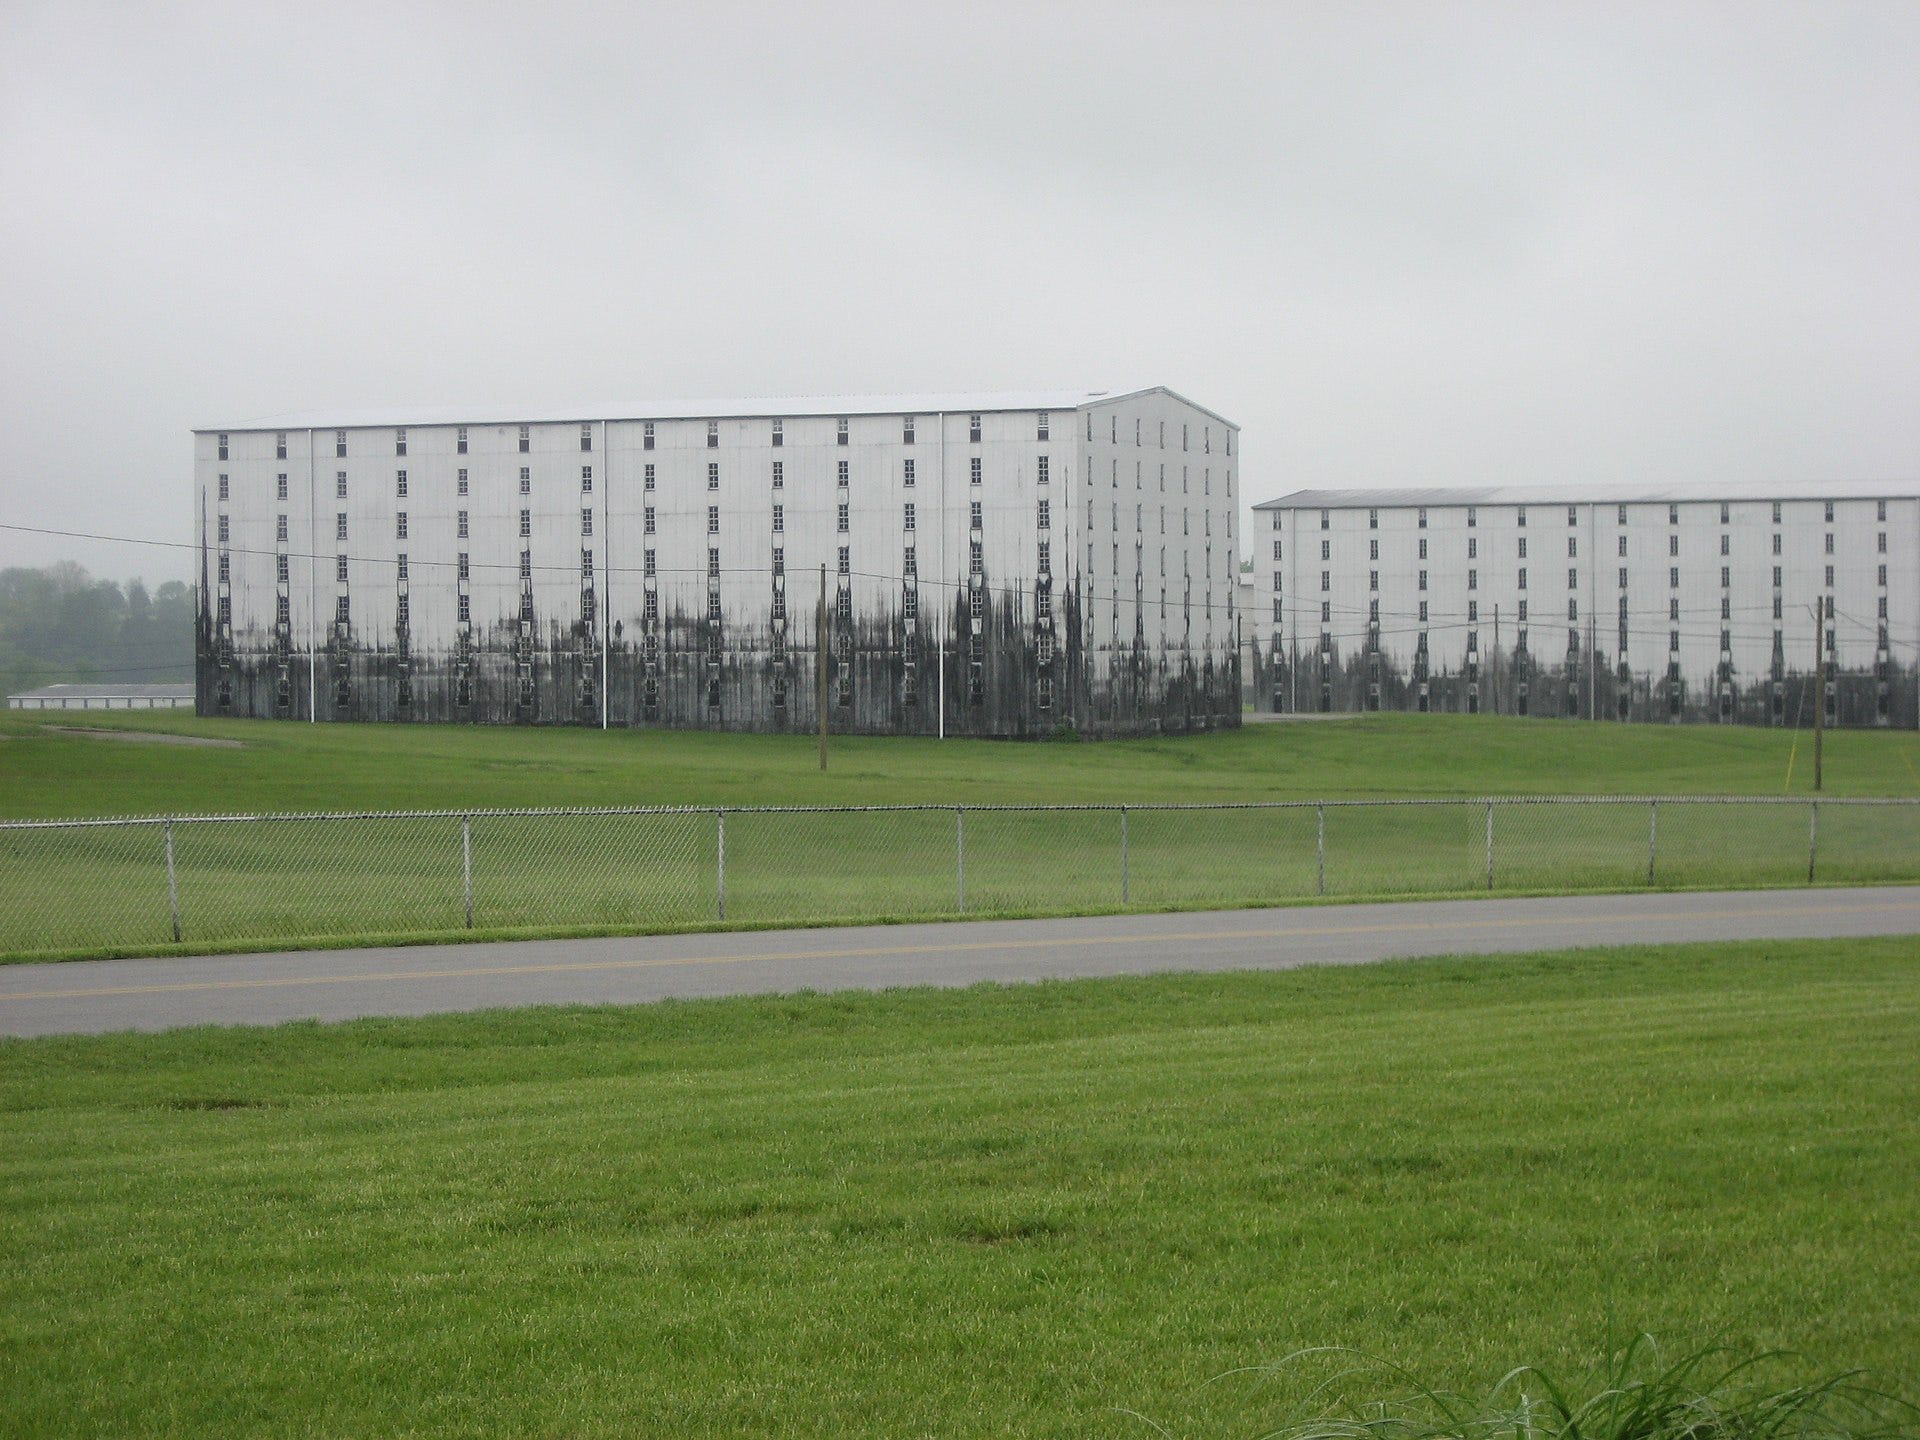 Heaven Hill distillery in Bardstown, Kentucky, US, where fungus is visible on the white warehouses